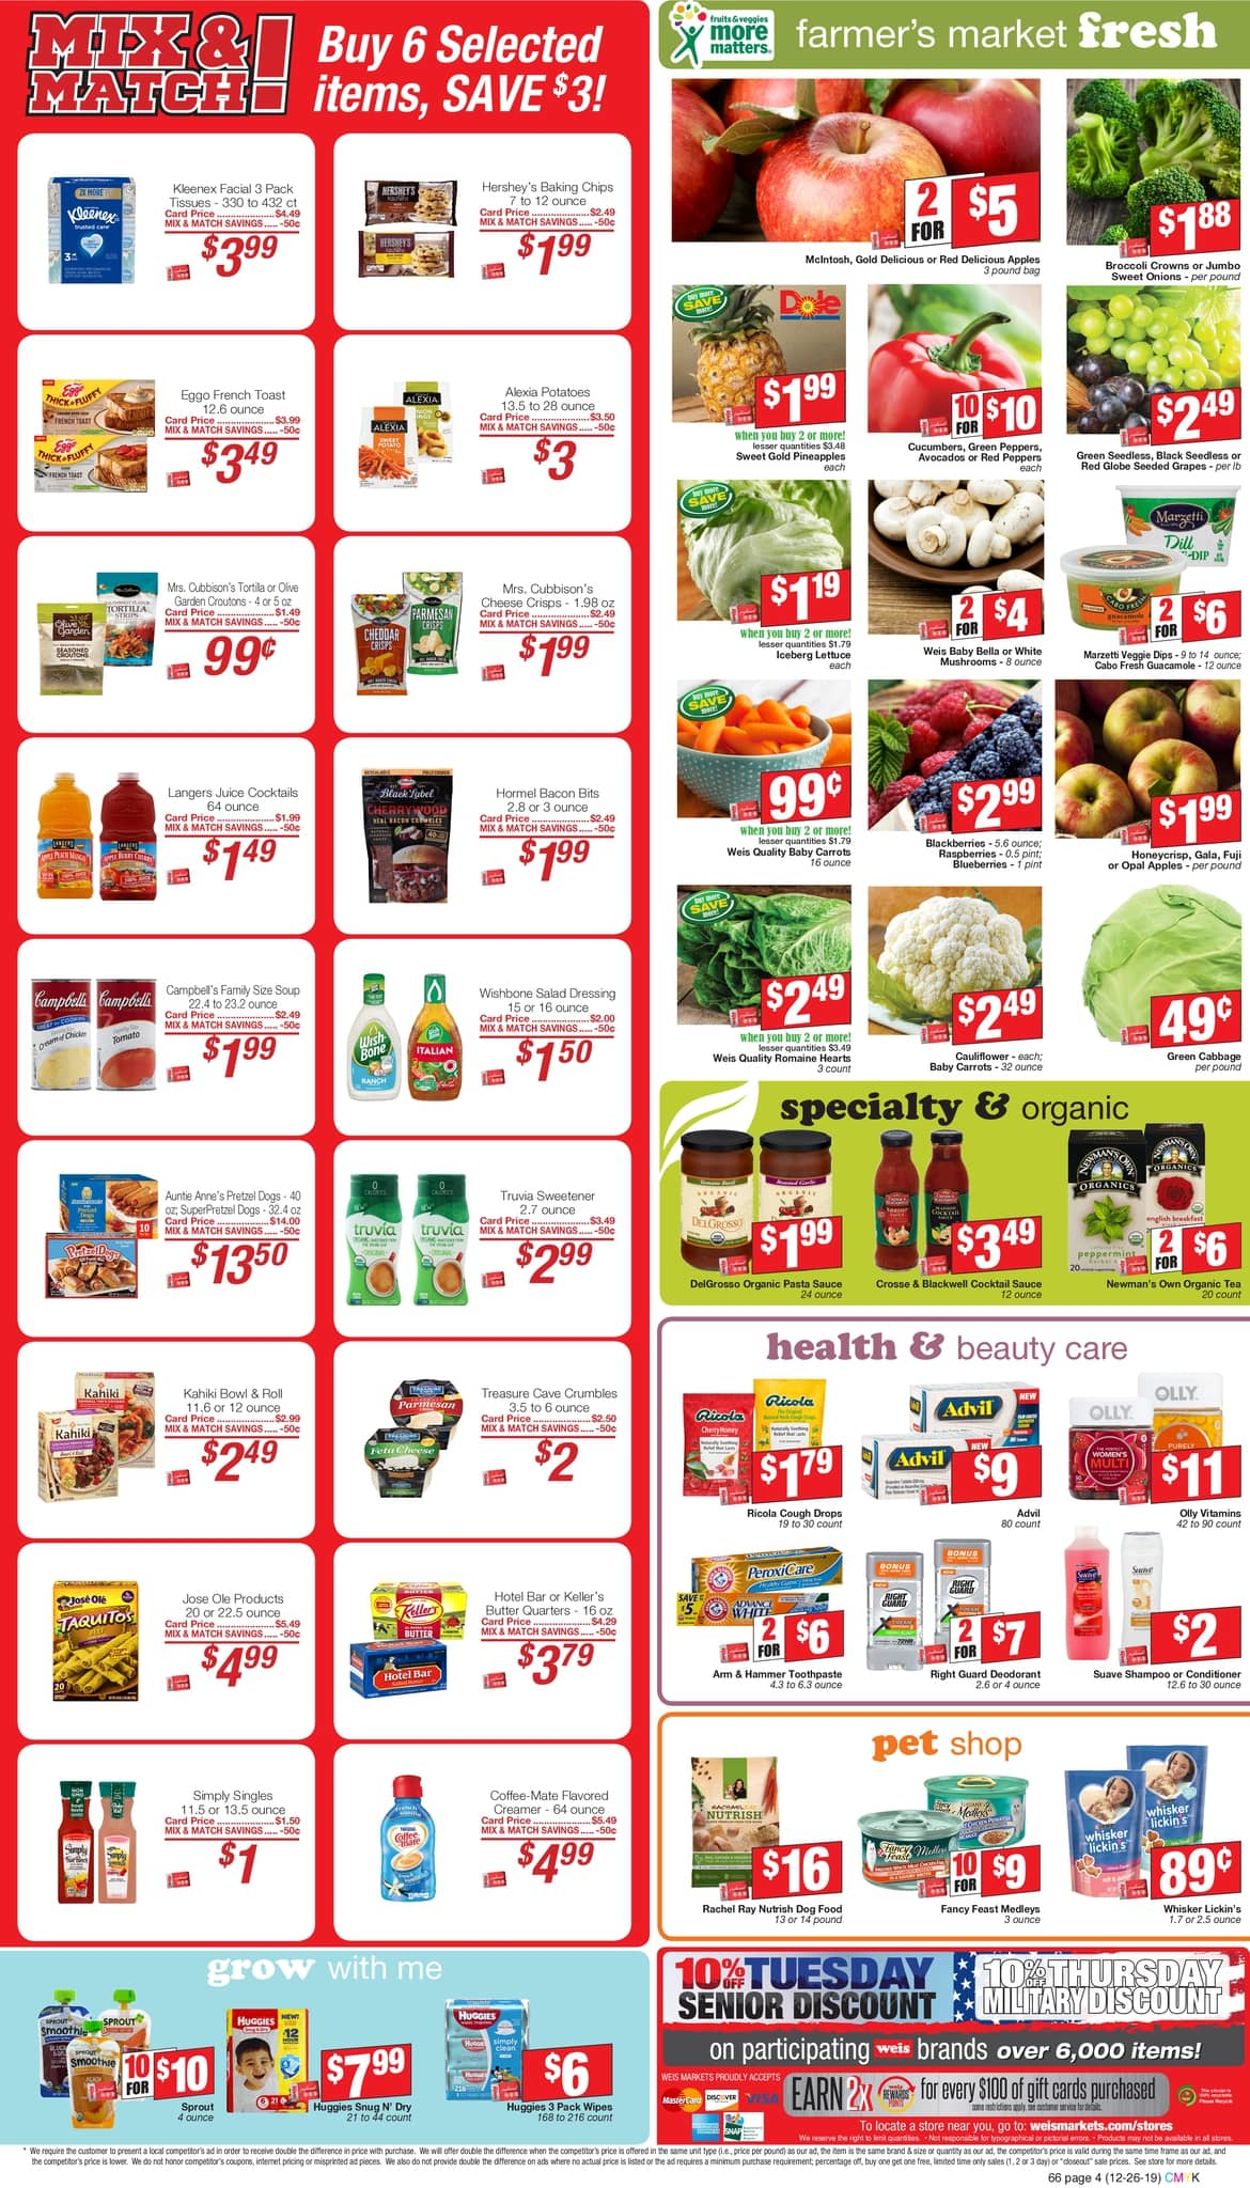 Catalogue Weis - New Year's Ad 2019/2020 from 12/26/2019